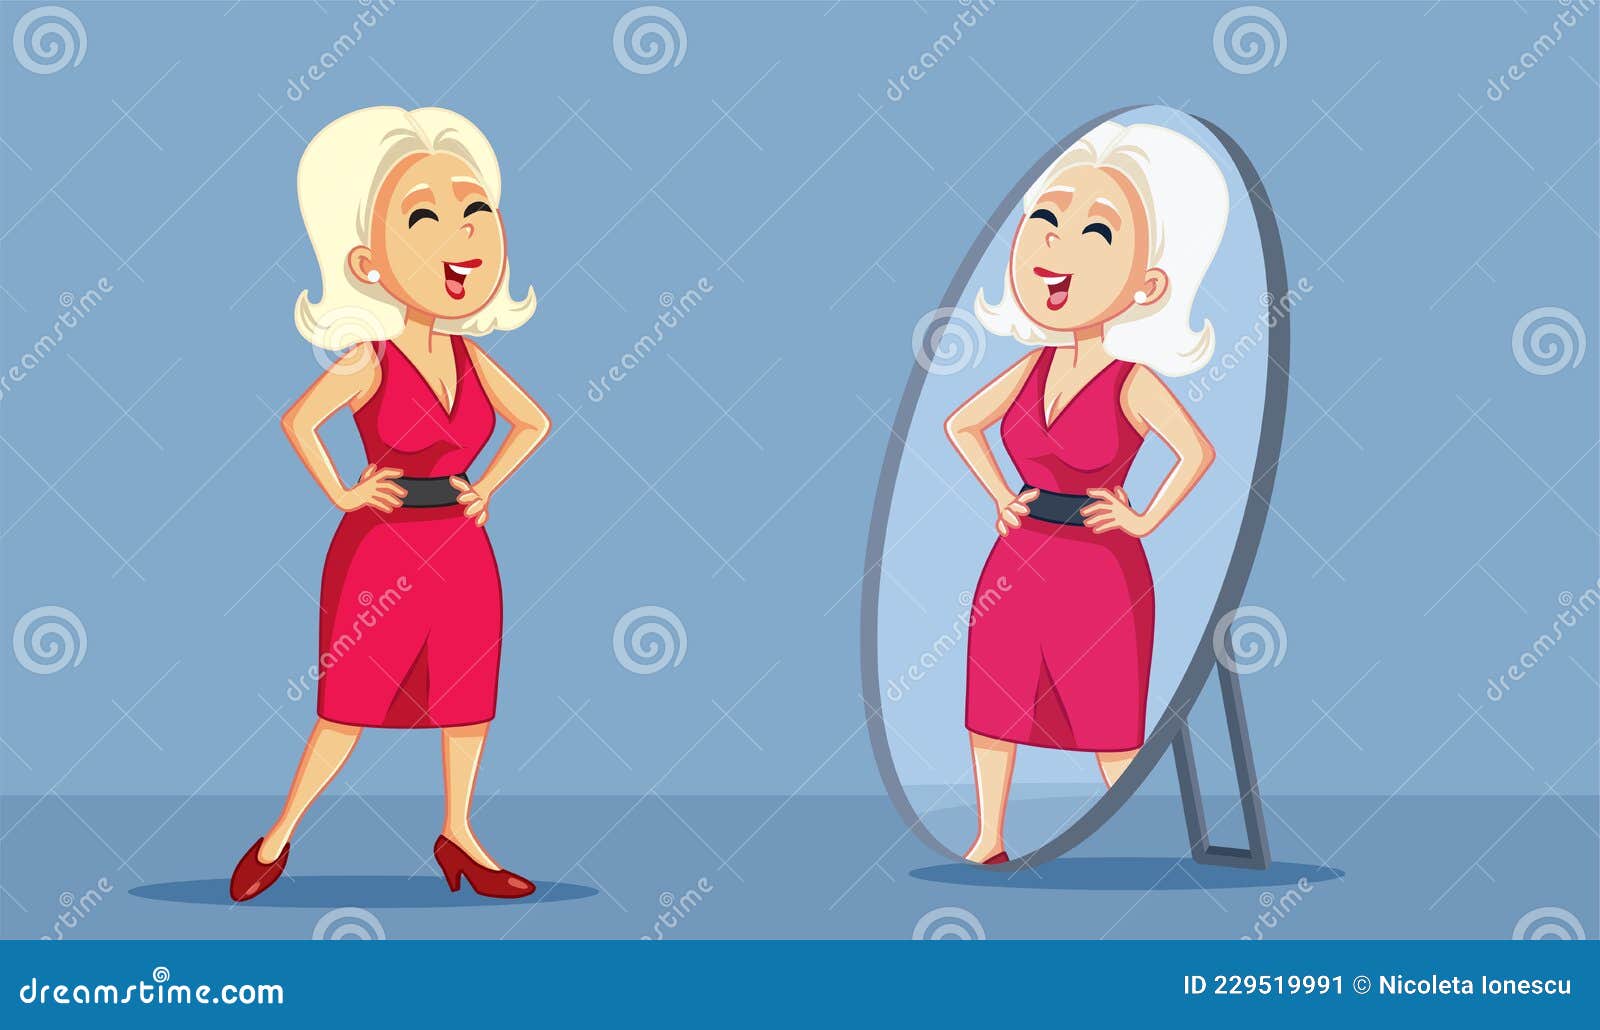 Confident Woman Looking Proudly in the Mirror Vector Cartoon Stock ...